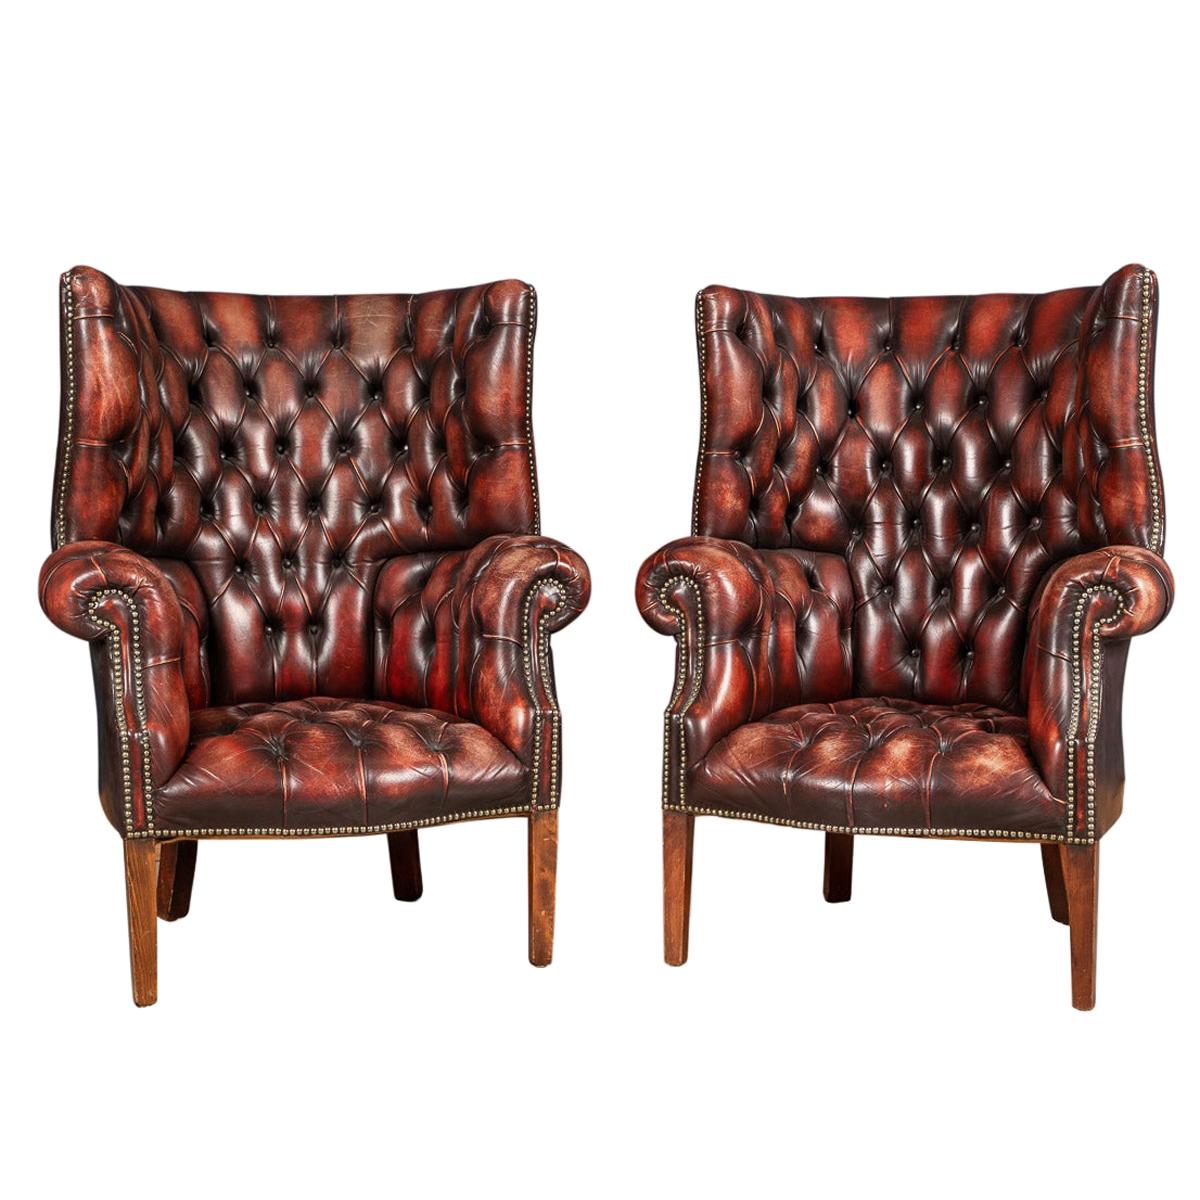 20th Century Pair of English Leather Barrel Back Armchairs c.1970